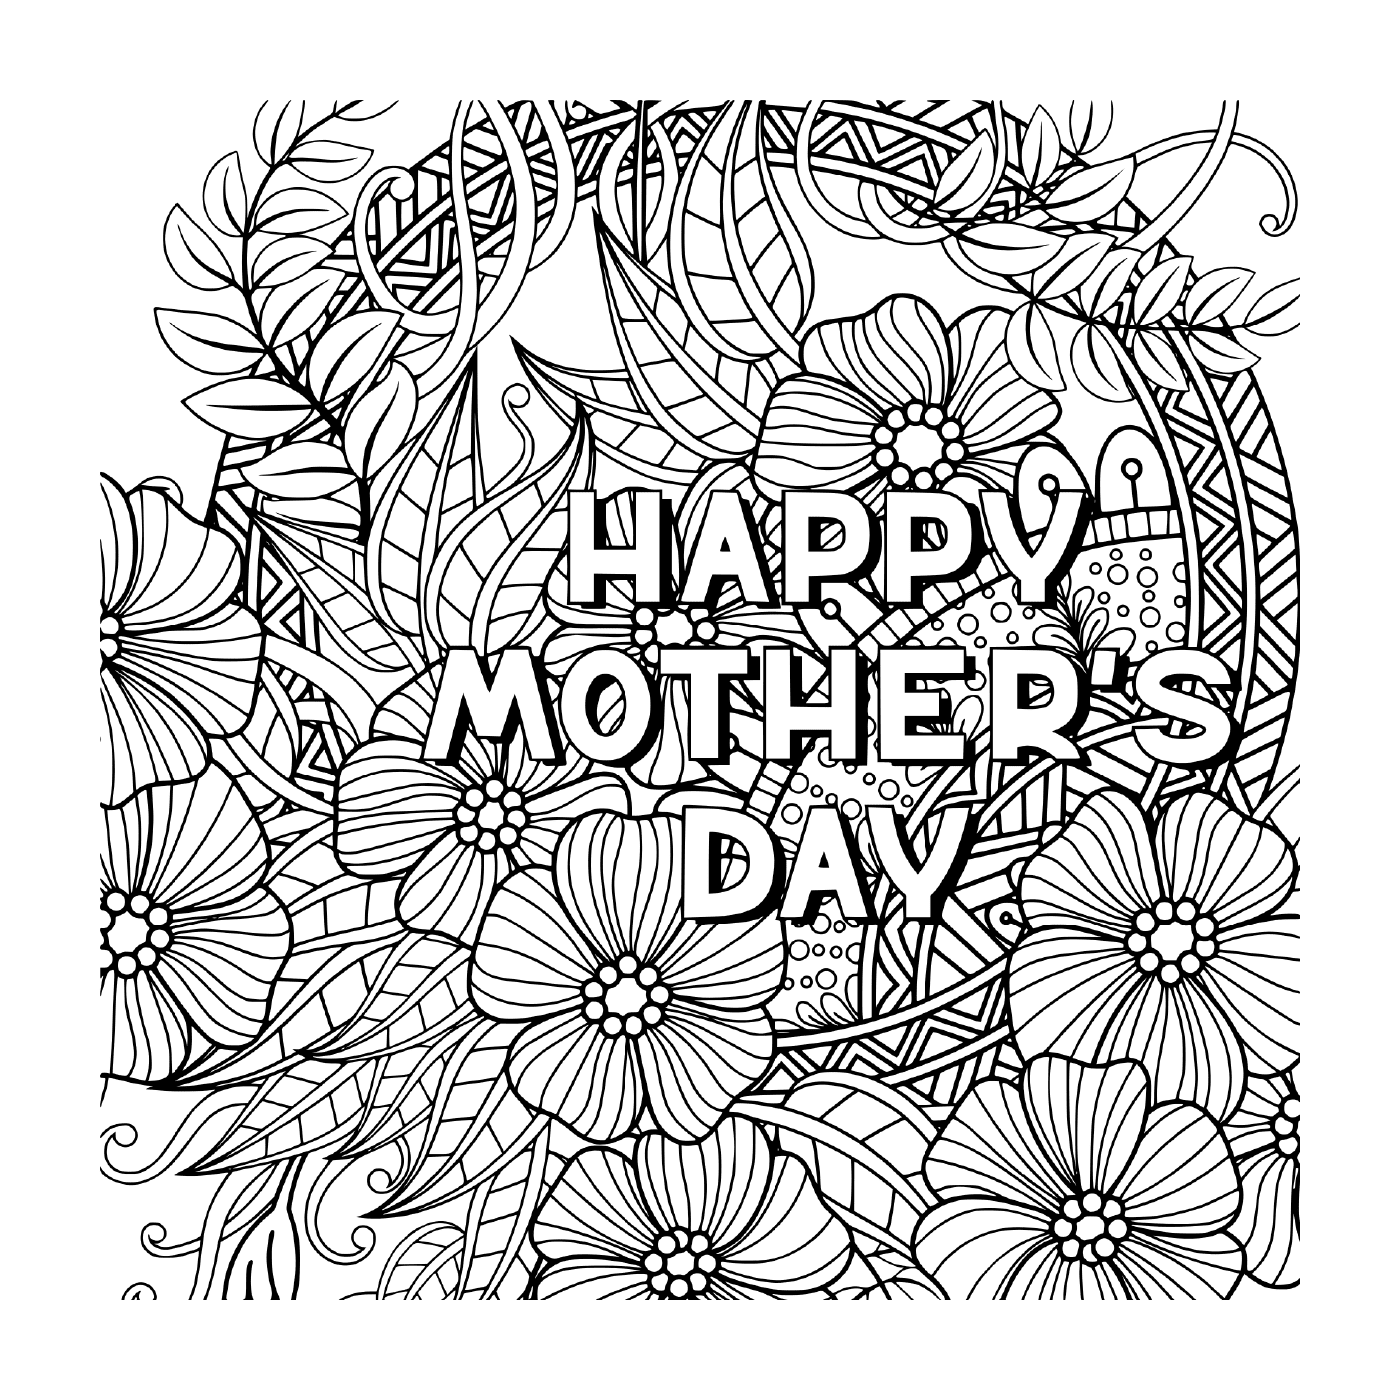  March 8th, an adult for Mother's Day 